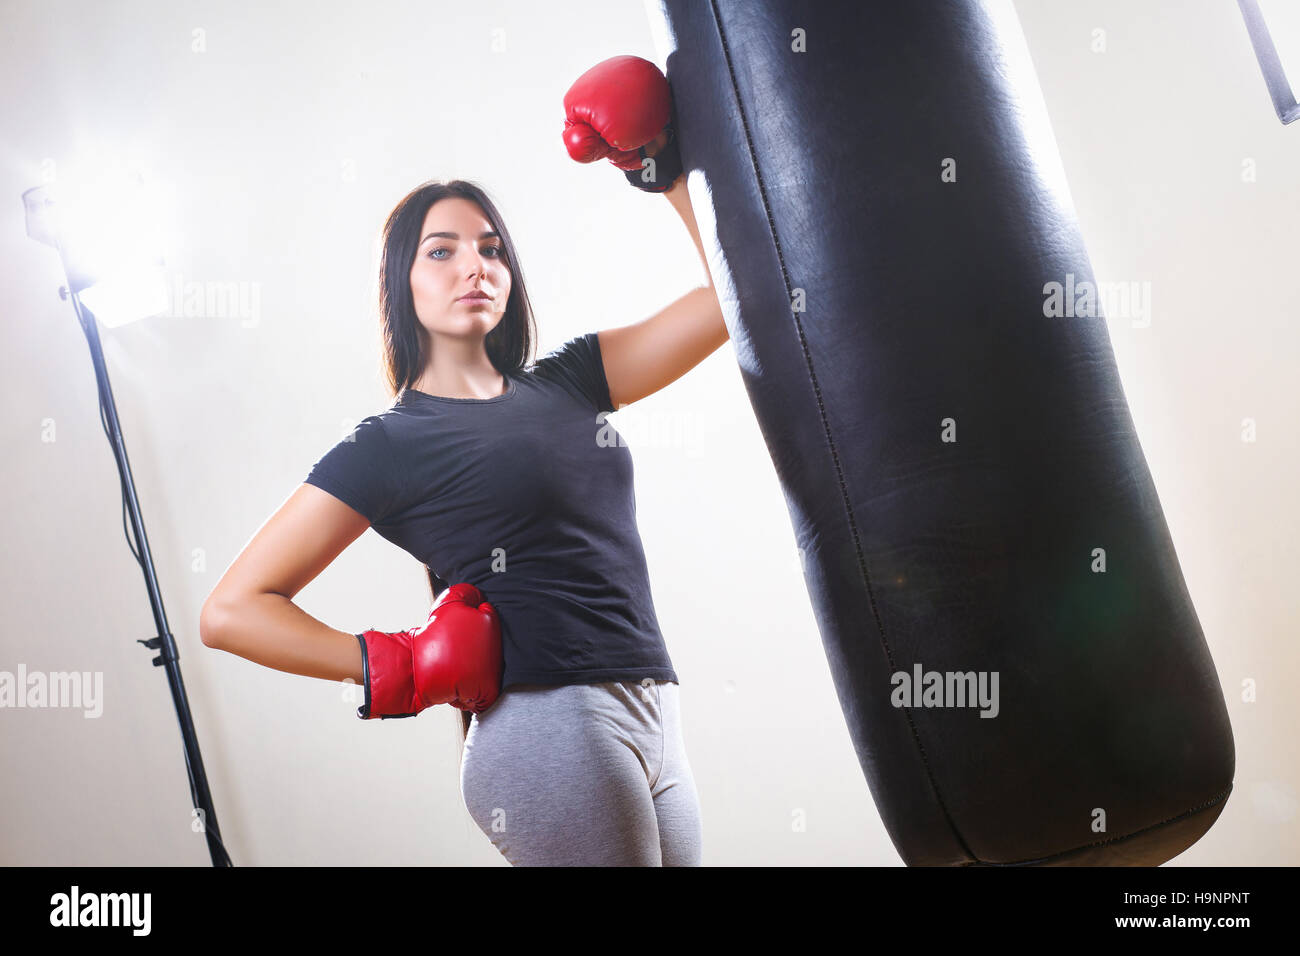 sports girl in boxing gloves and body punching bag Stock Photo